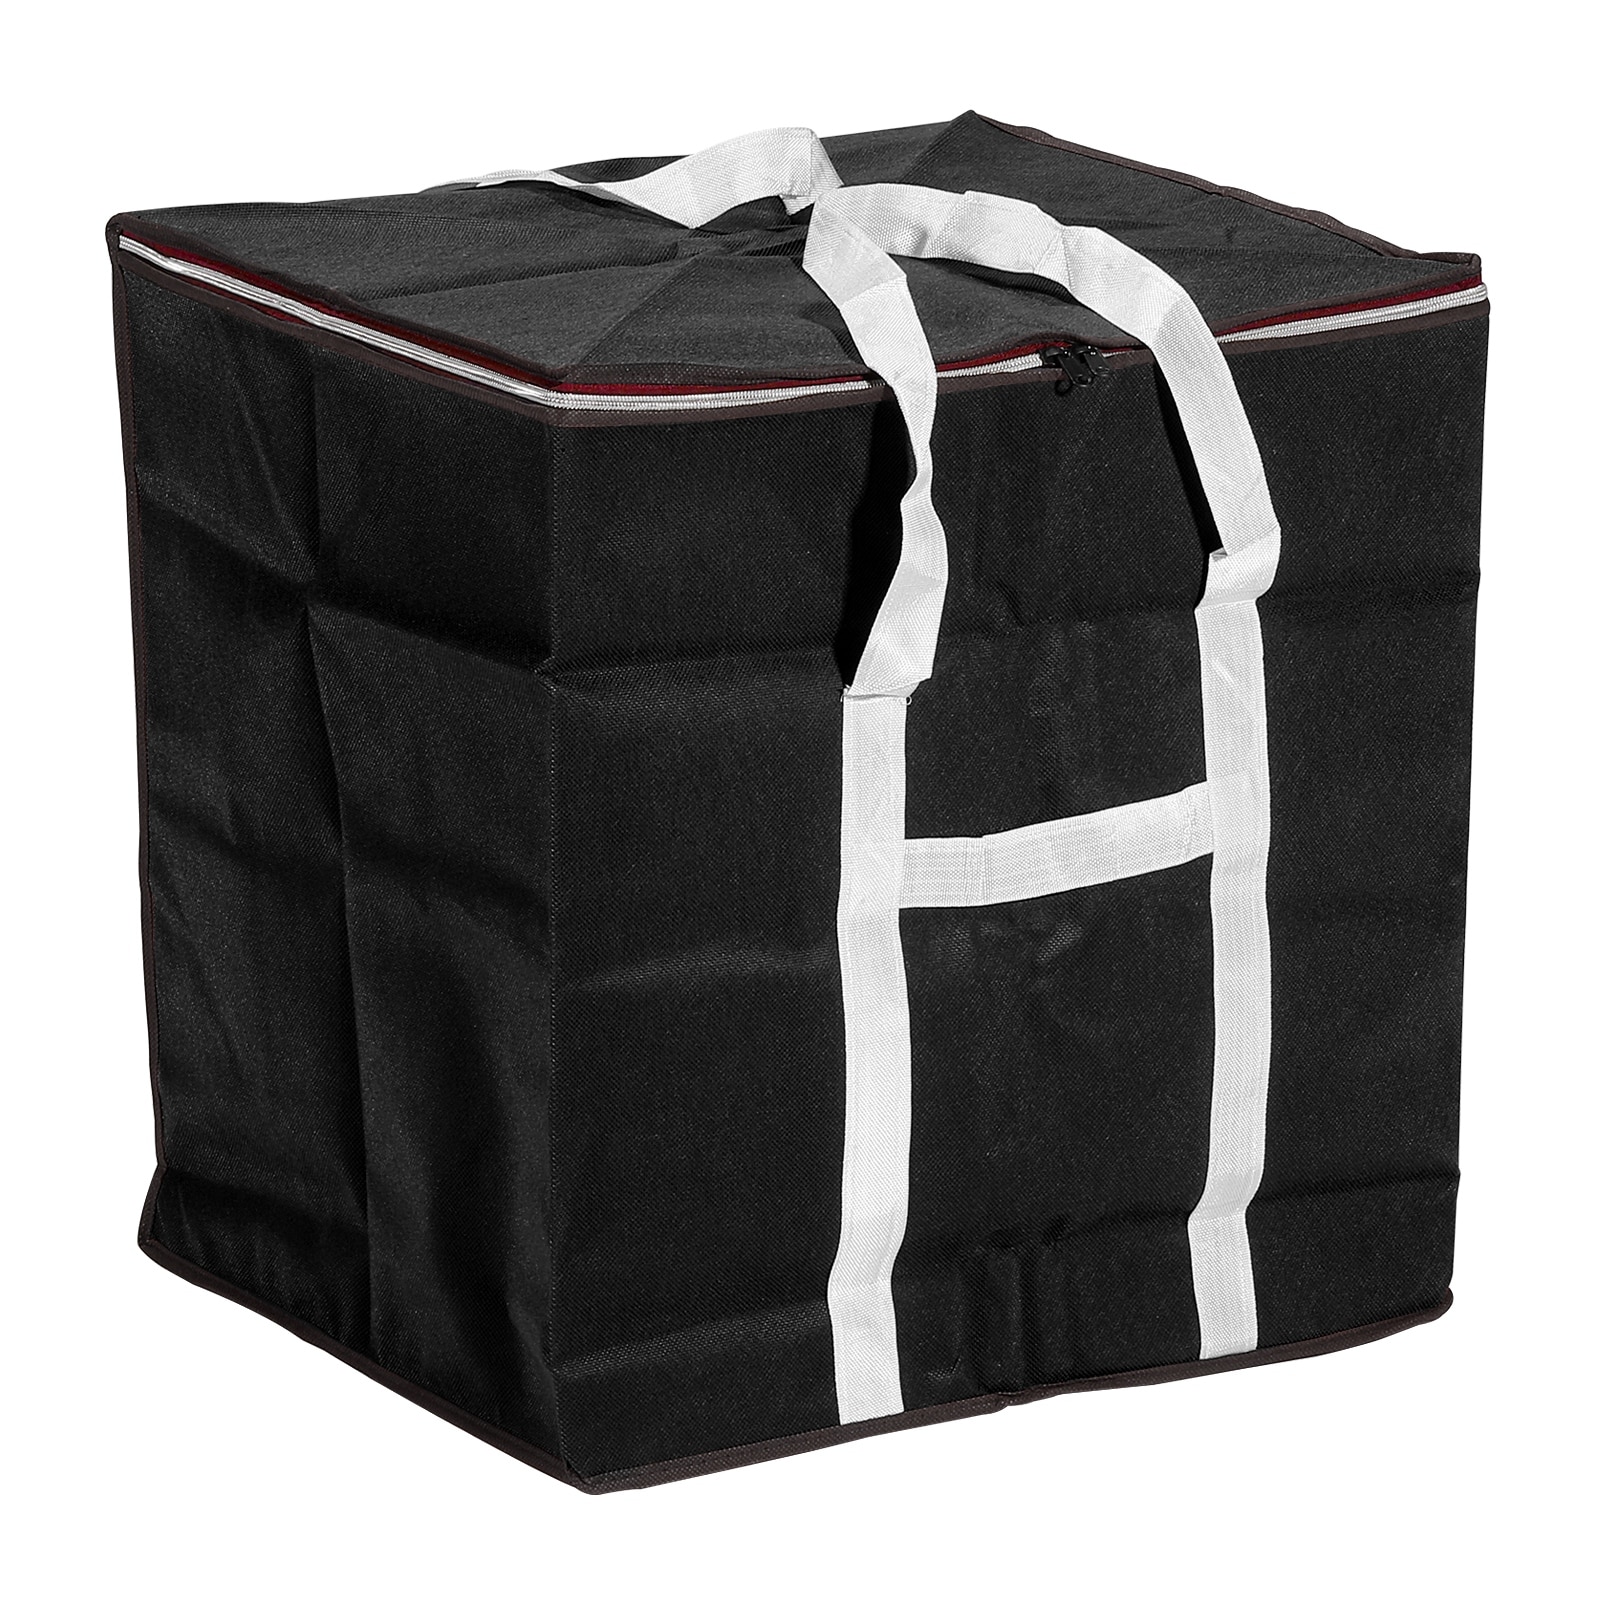 https://ak1.ostkcdn.com/images/products/is/images/direct/92ba6676e429f7dcfed512e306411514bd11dc09/Storage-Tote-with-Zippers%2C-19.7%22-L-Heavy-Moving-Tote-Bags-for-Bedding.jpg